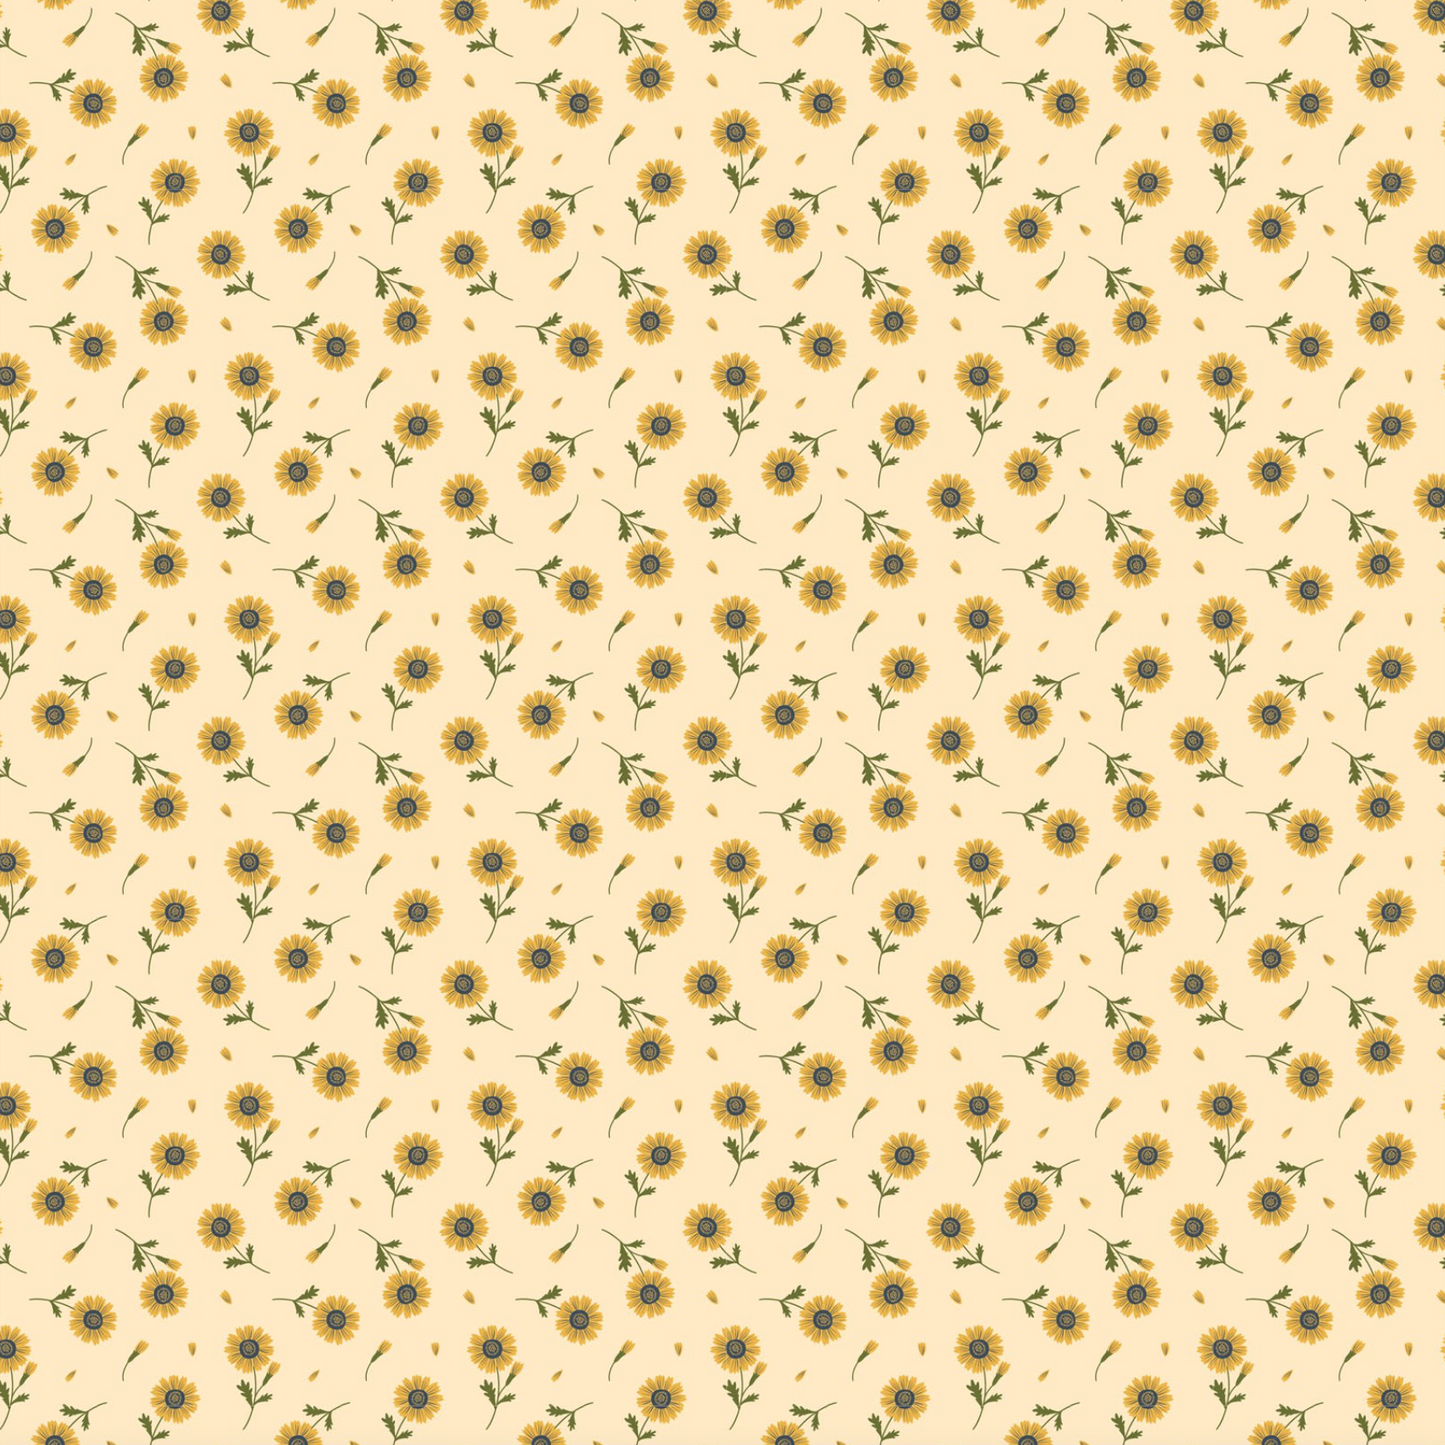 Sunshine & Chamomile, Tossed Daisies, Yellow, SC23504, sold by the 1/2 yard